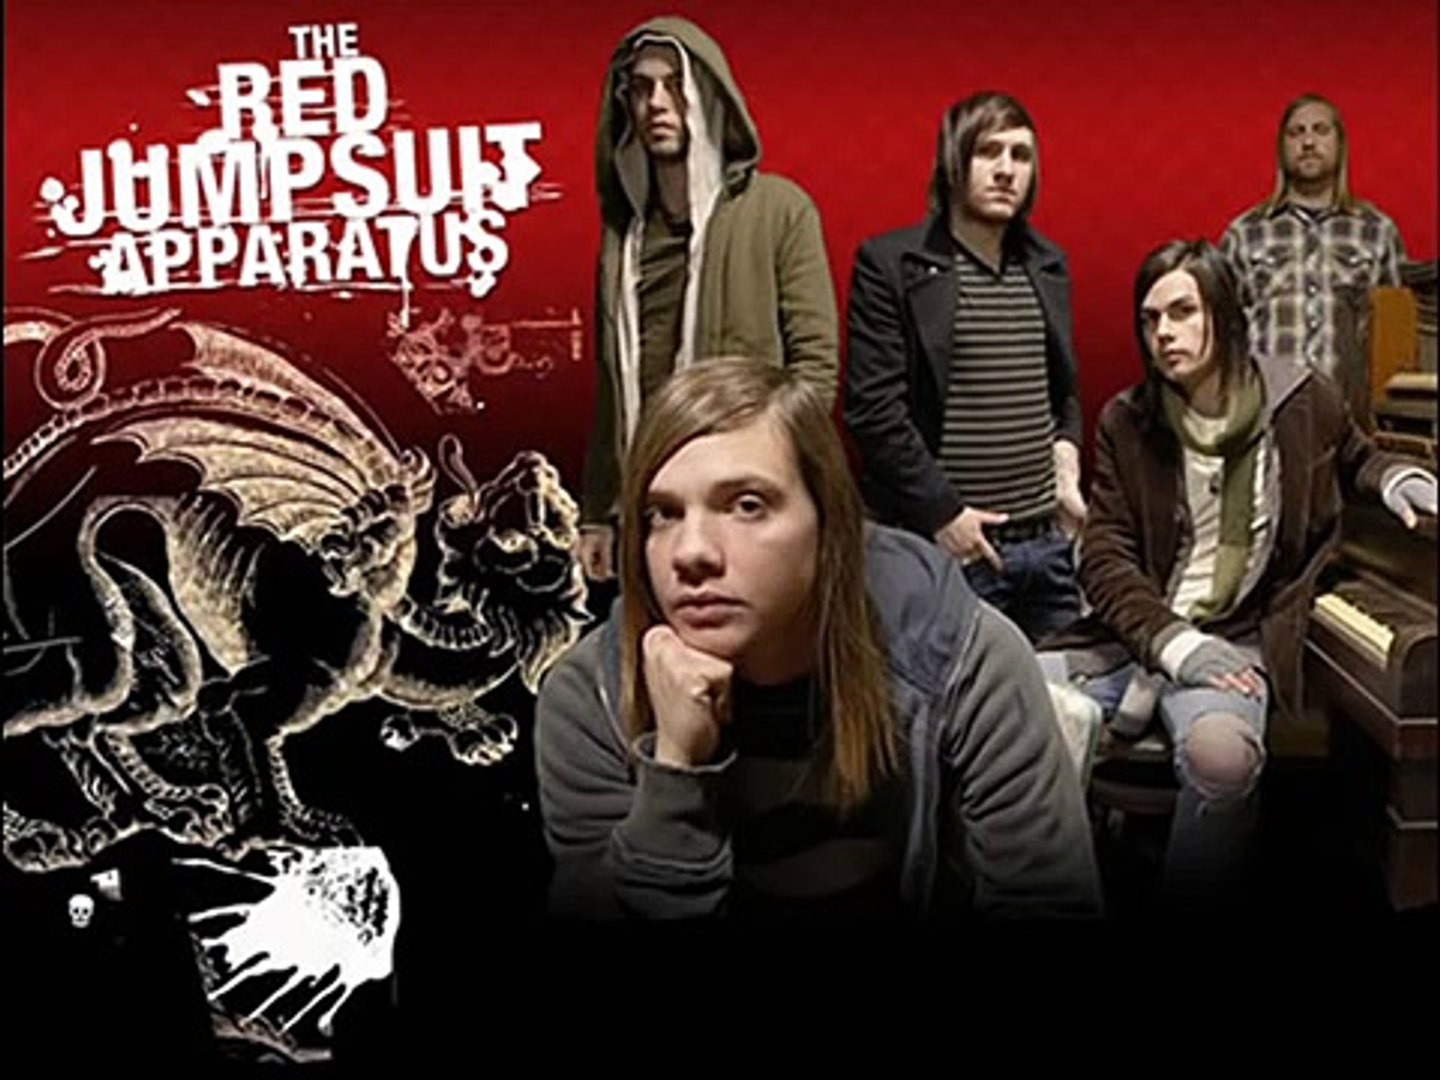 The red jumpsuit apparatus. Ронни Винтер. Face down the Red Jumpsuit apparatus. The Red Jumpsuit apparatus 2006.